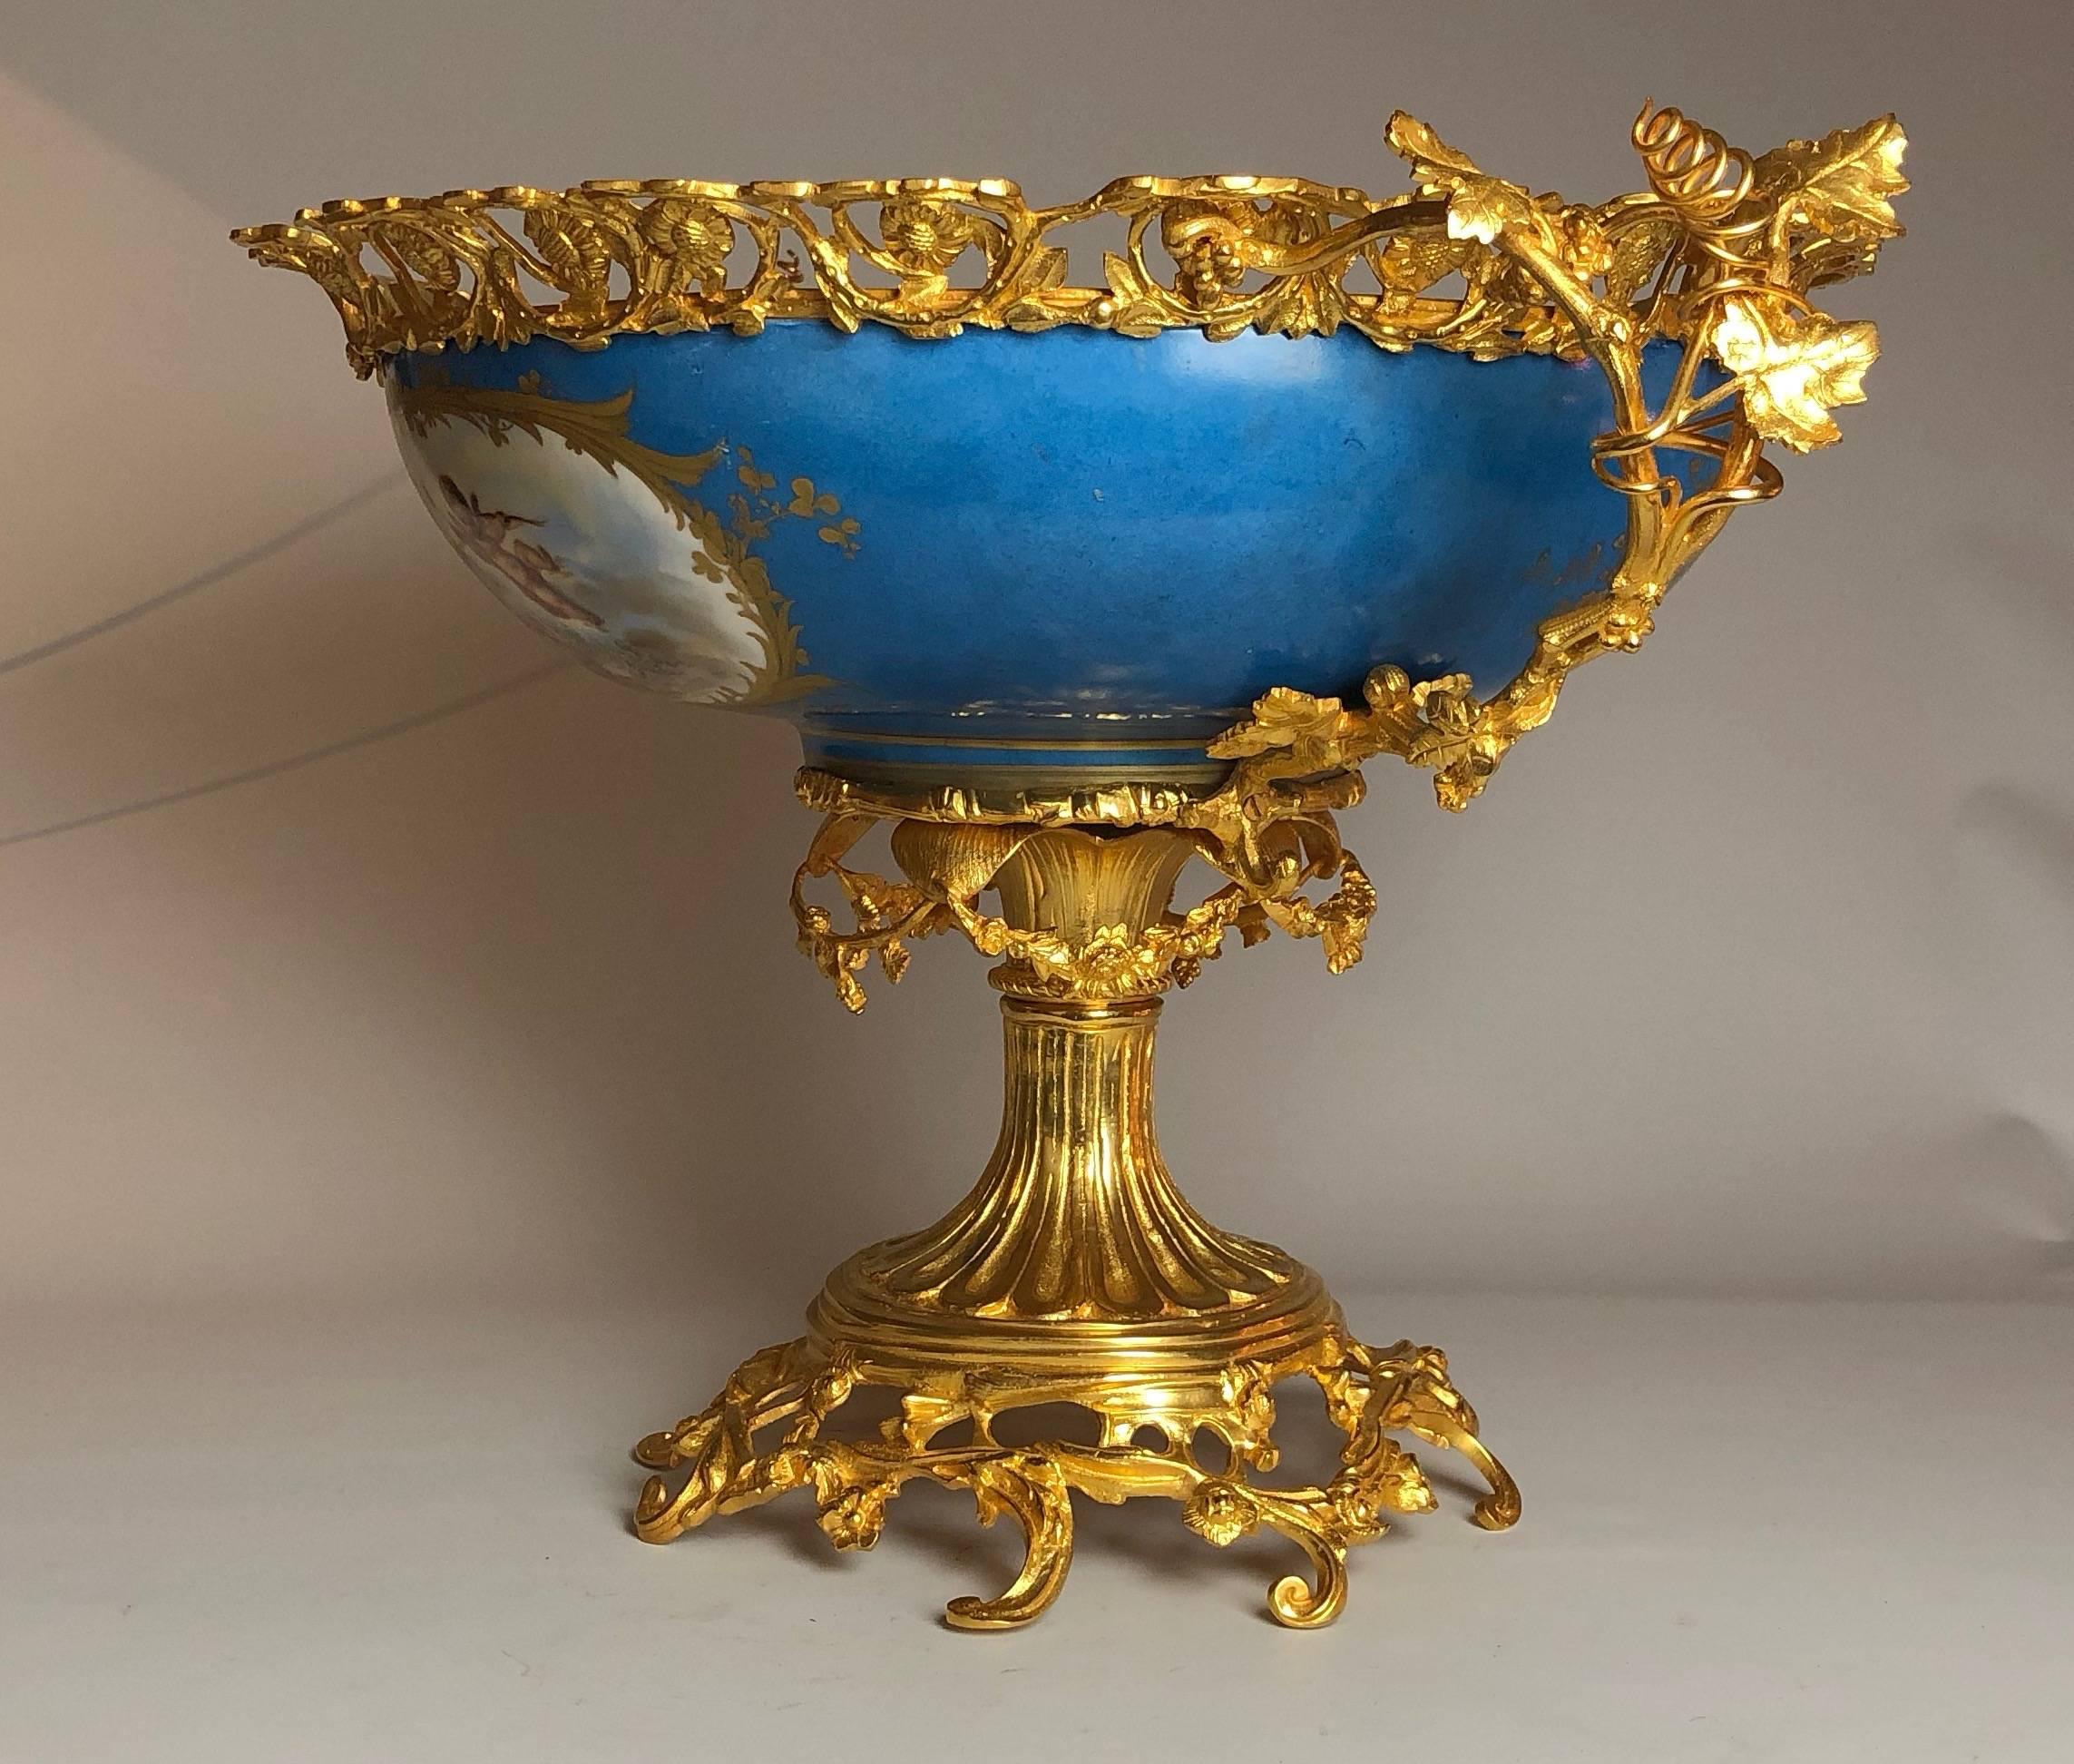 An impressive gilt bronze-mounted Sèvres centrepiece, of the highest quality.
 
French, circa 1870.

The item 21